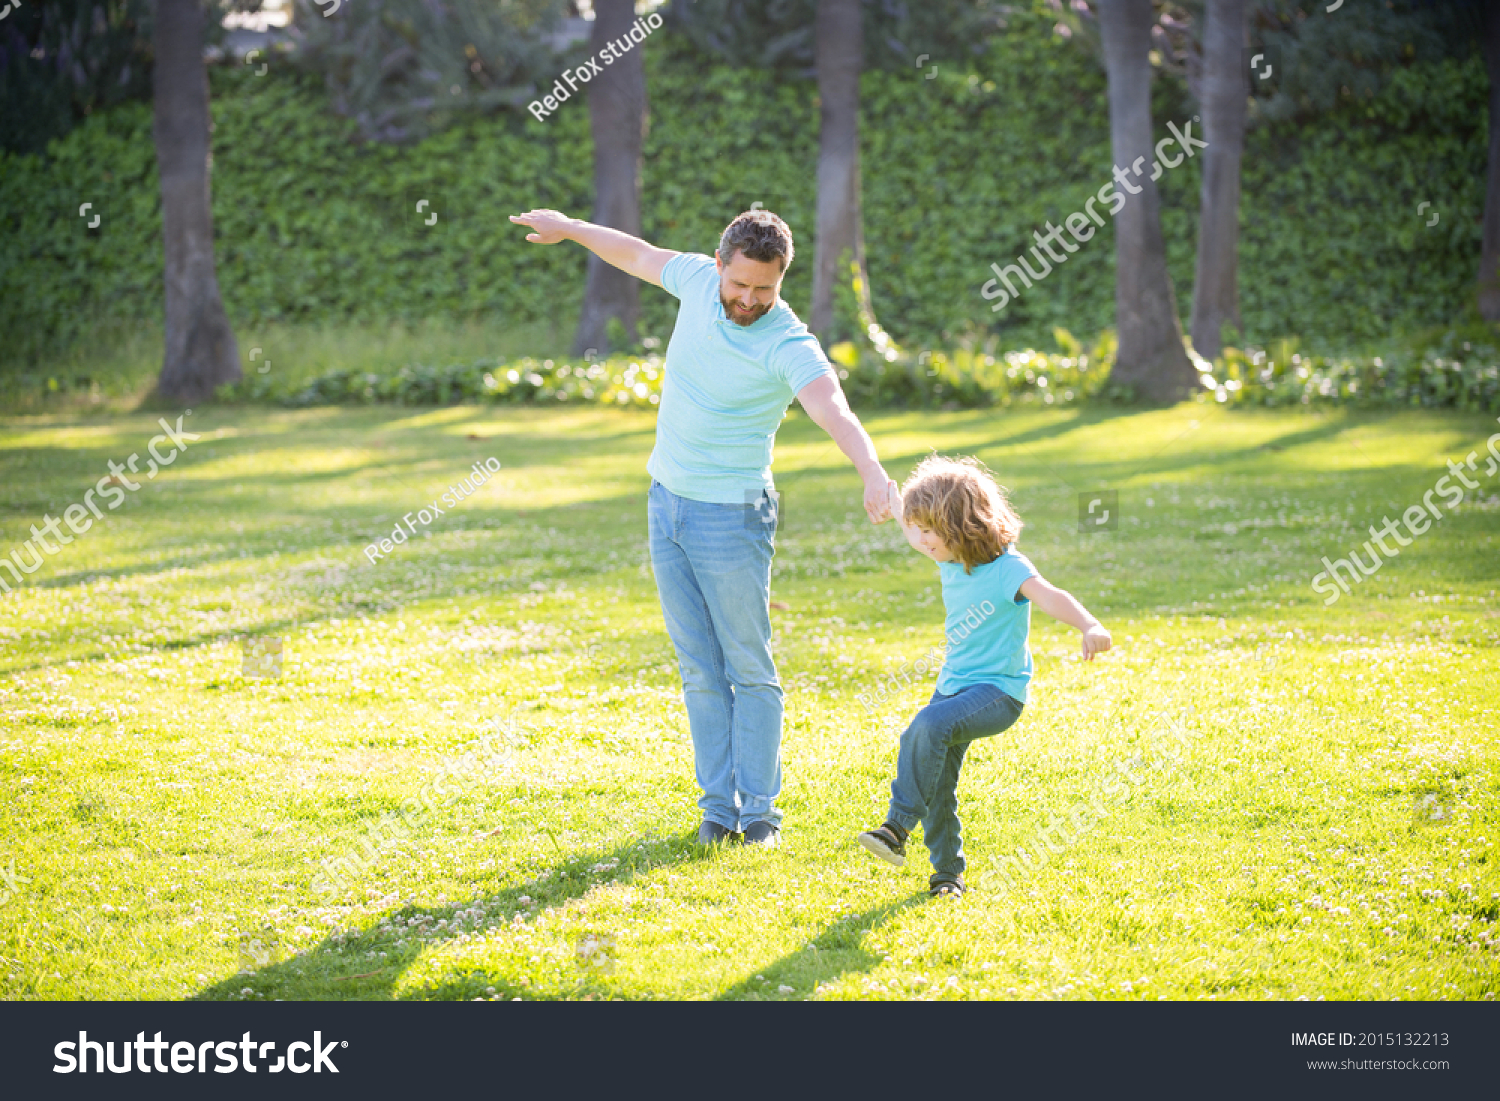 Enjoy every moment. Happy family enjoy summer outdoors. Playful father and son. Family fun #2015132213